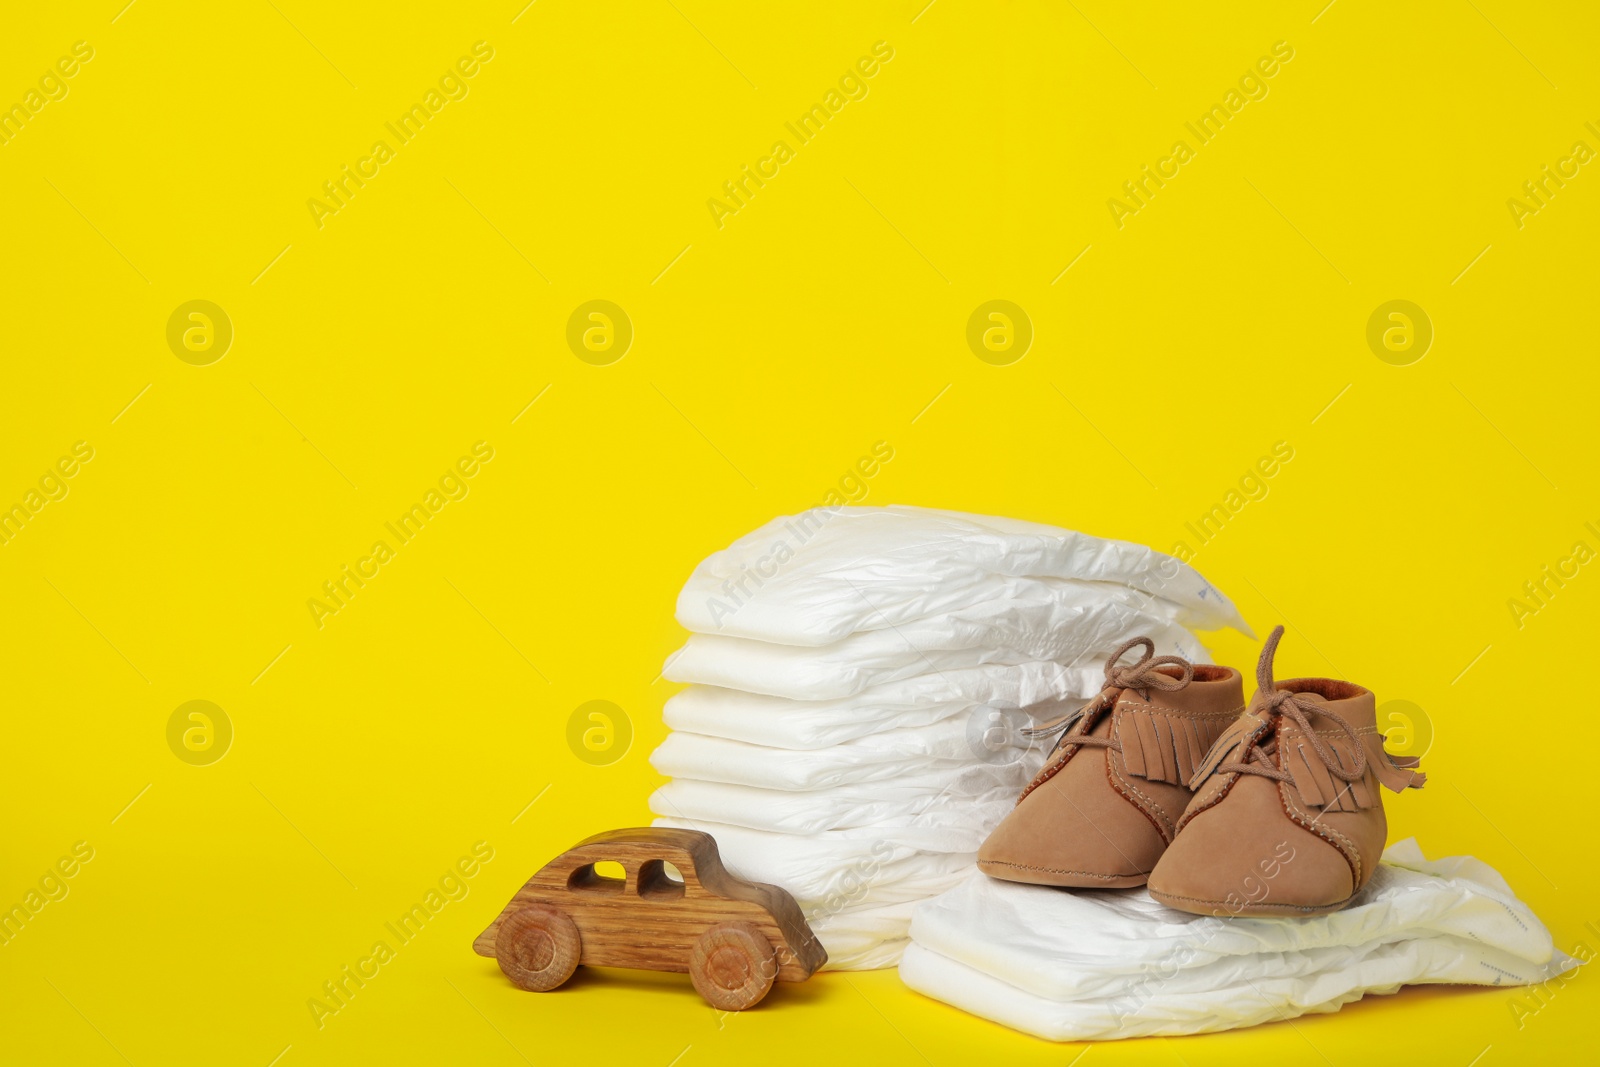 Photo of Diapers, toy car and baby shoes on yellow background. Space for text